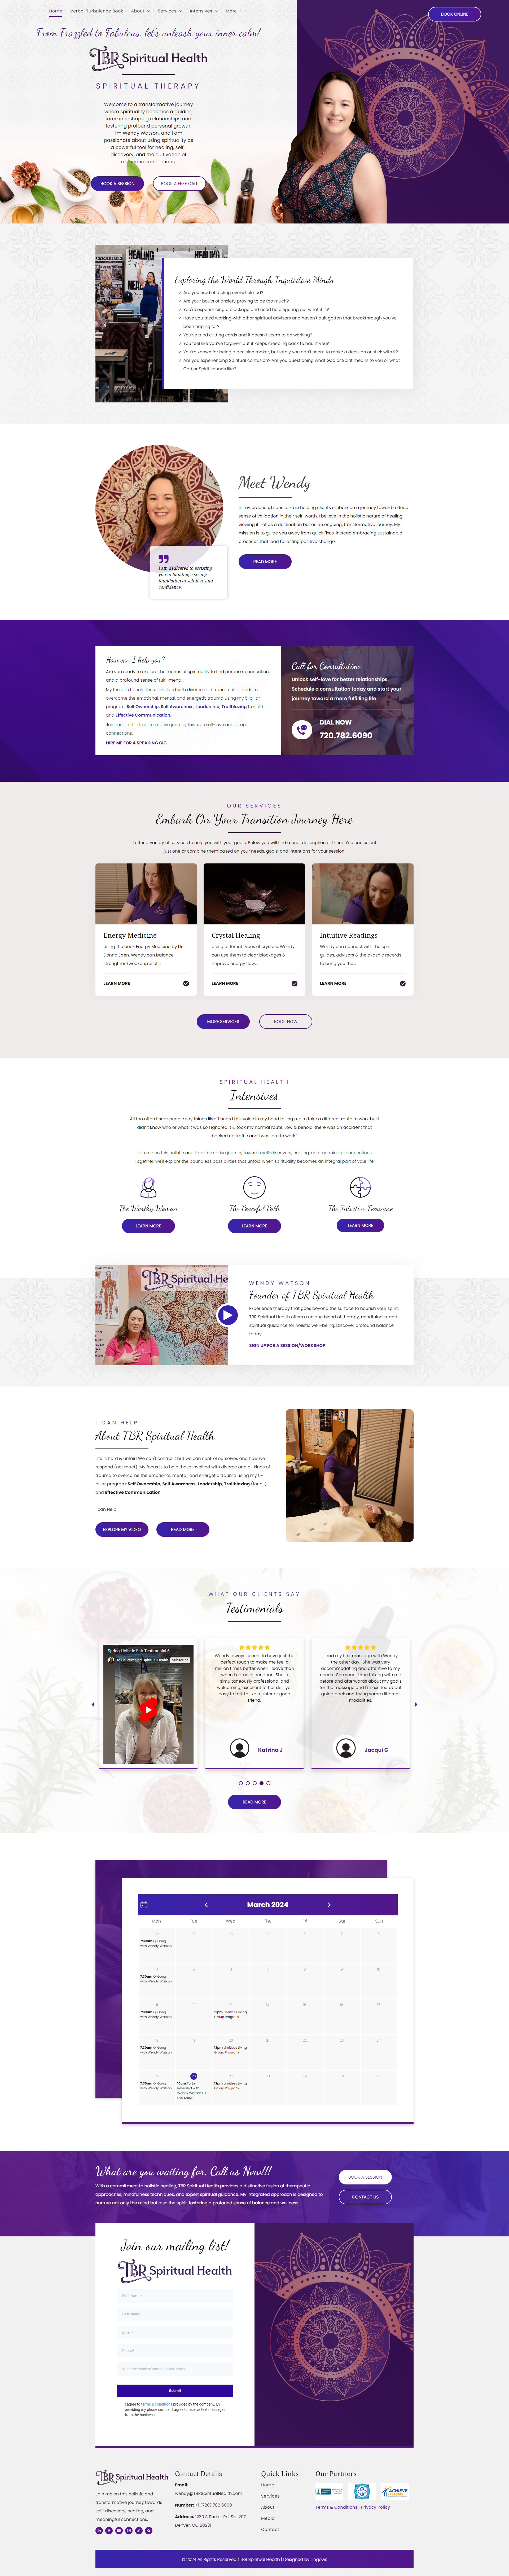 A screenshot of a website with a purple background.